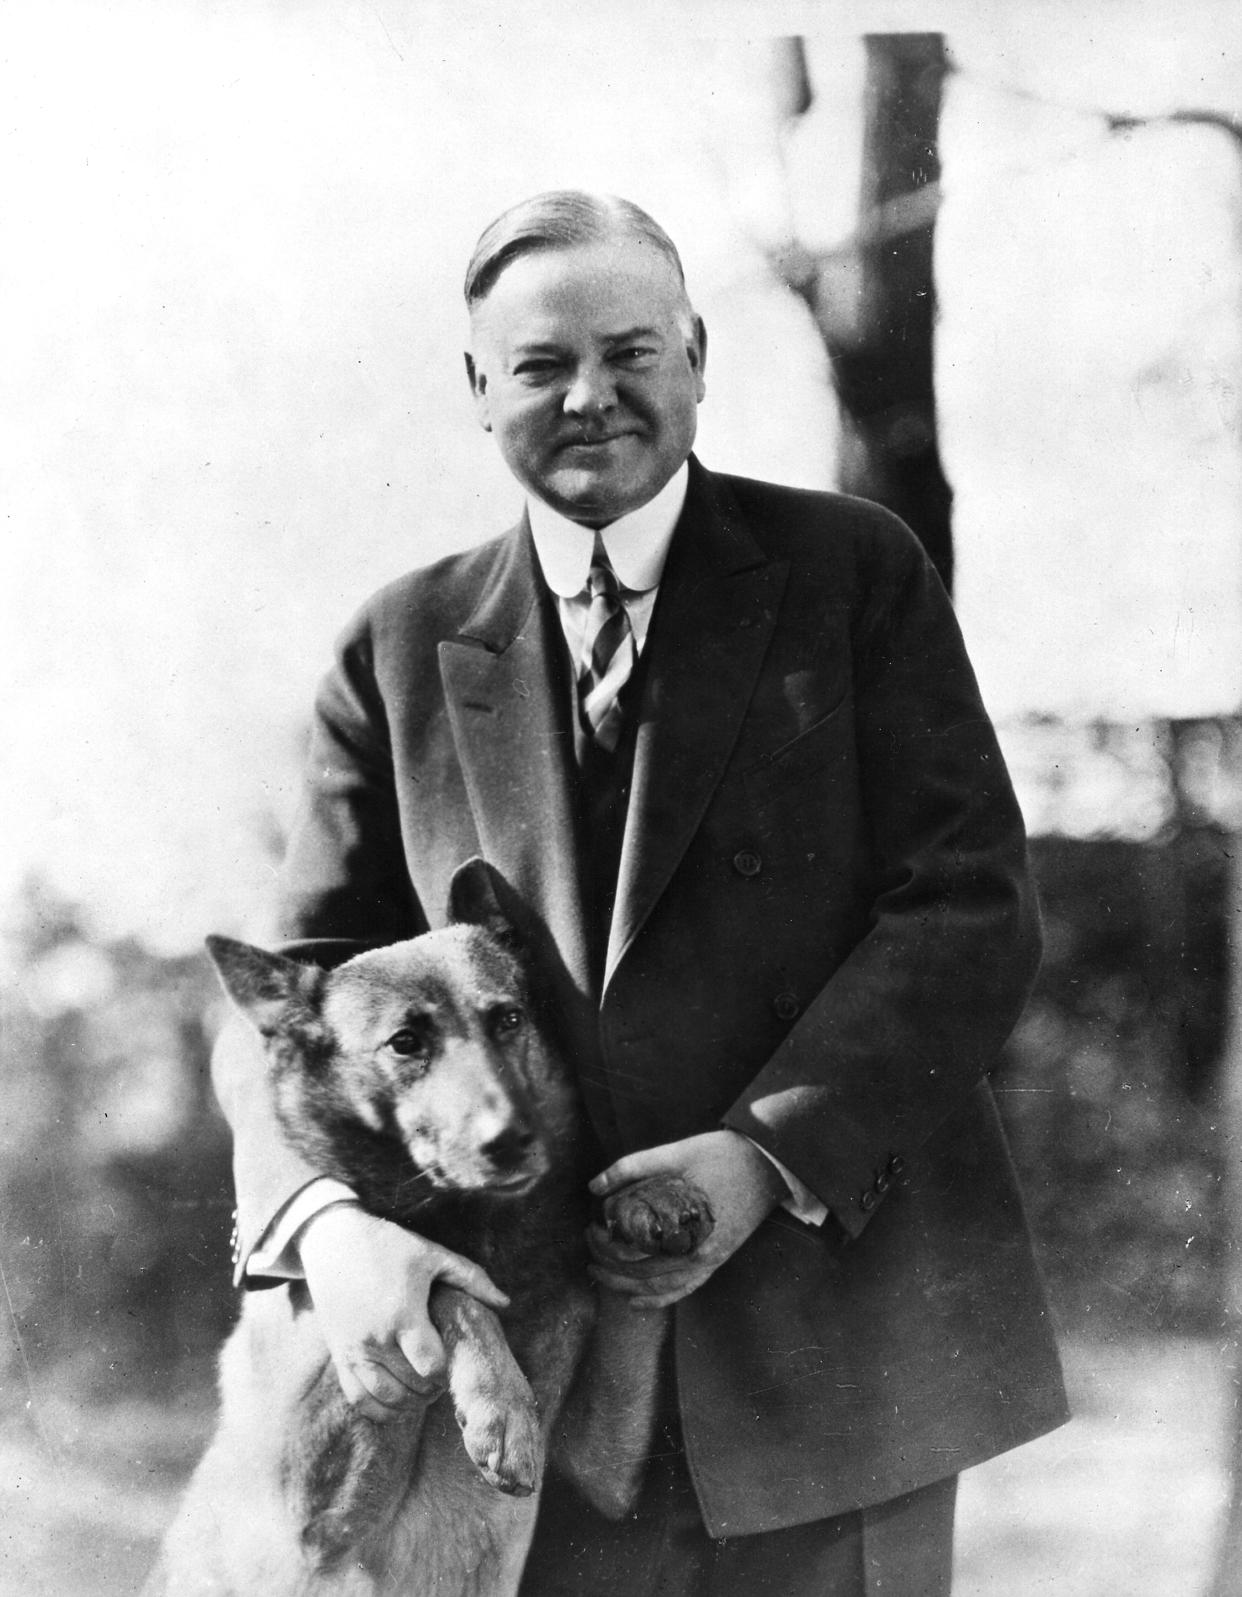 Herbert Hoover poses with his pet dog King Tut, 1930s. (Getty Images)